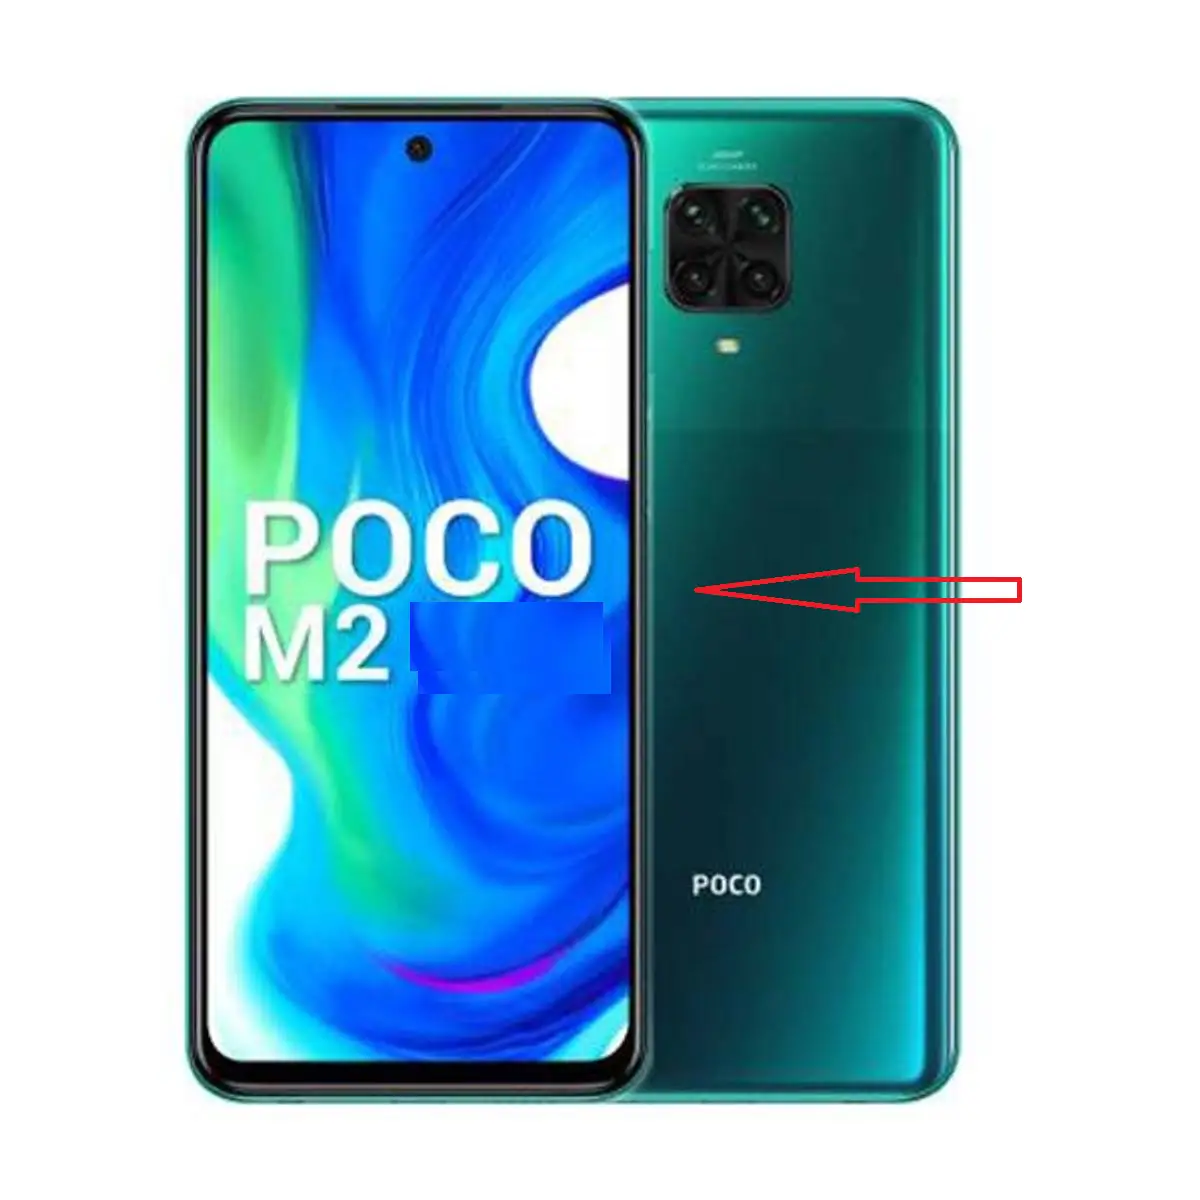 How to Unlock Poco M2 Mobile Phone? Forgot Password or Pattern